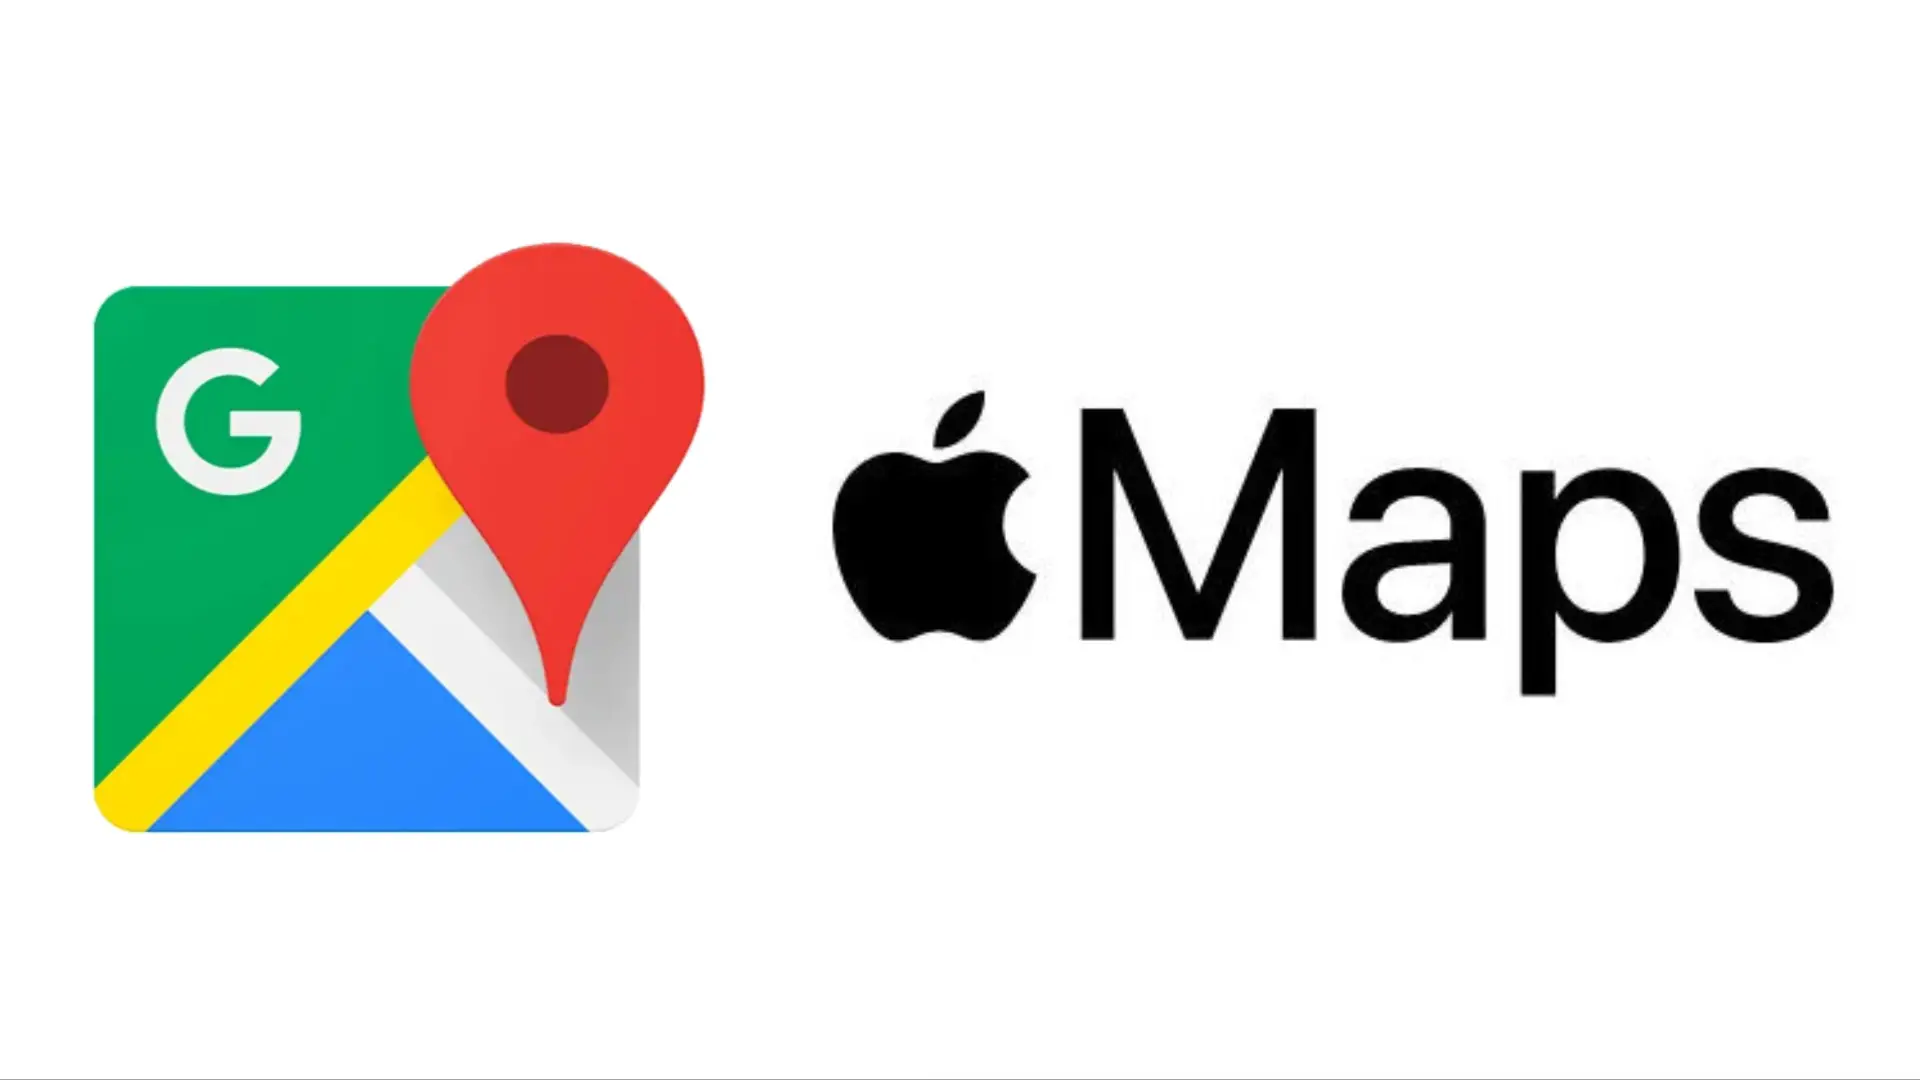 Google Apple Maps logo with icon and apple logo and maps in black and color scheme